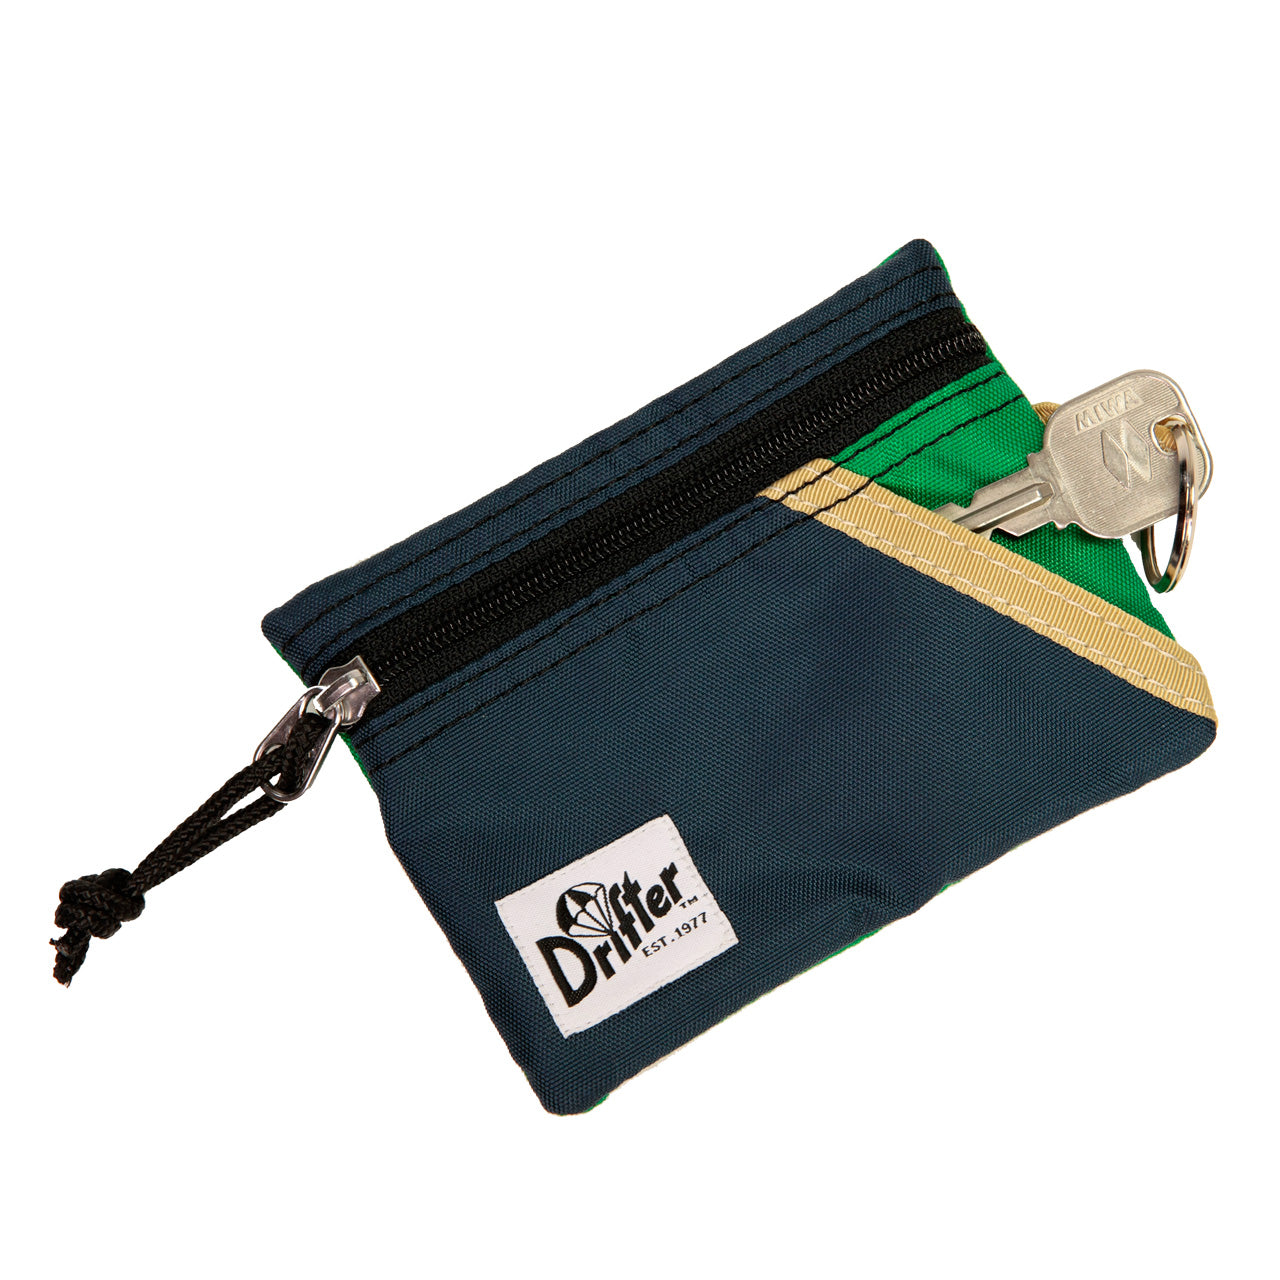 coin pouch with keys